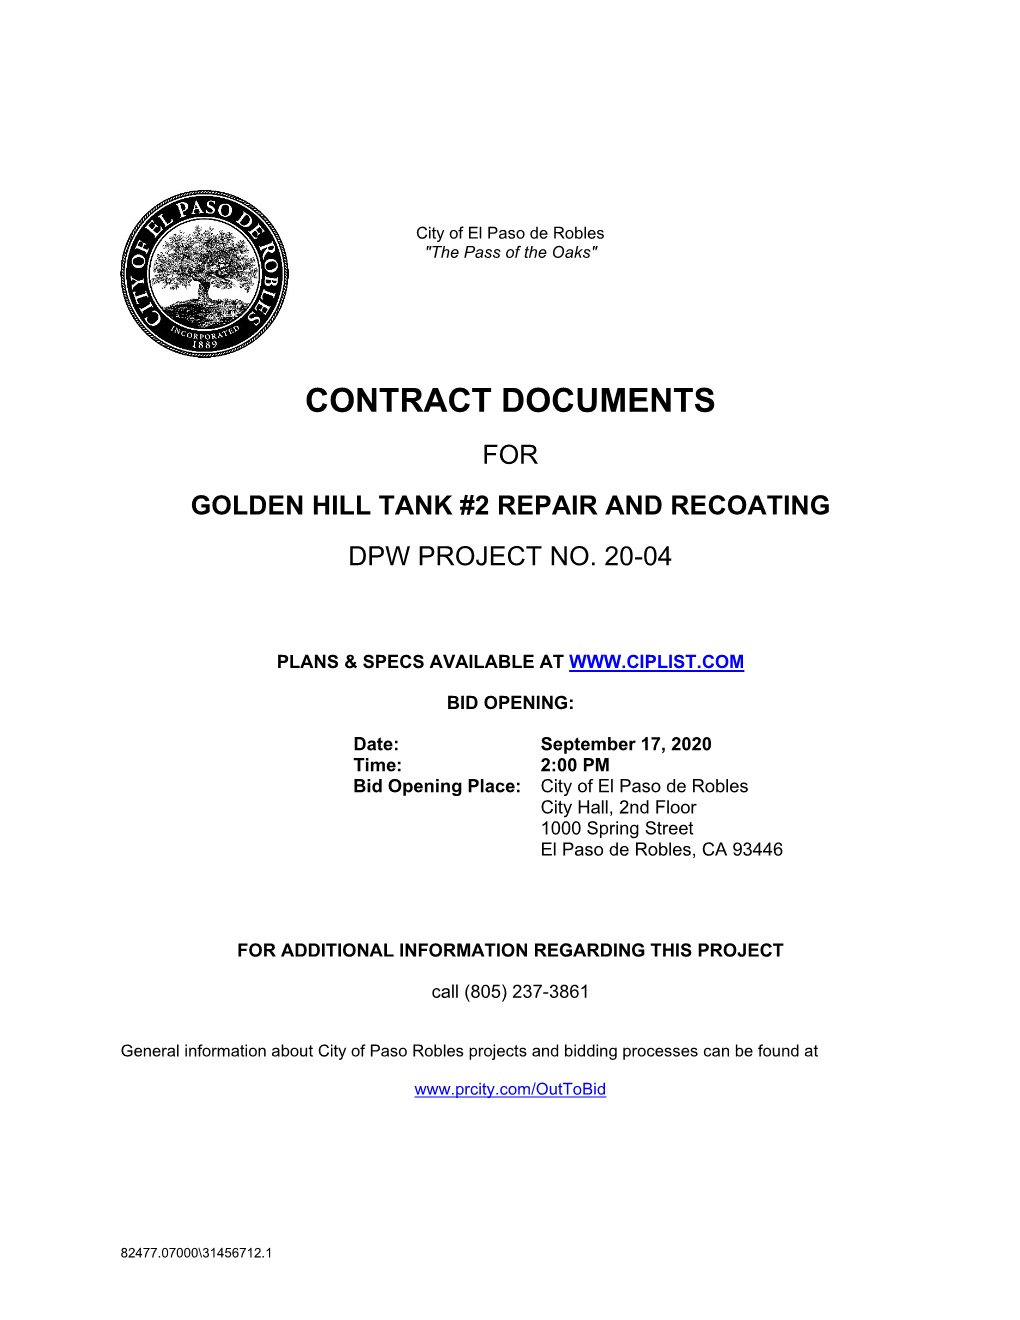 Contract Documents for Golden Hill Tank #2 Repair and Recoating Dpw Project No